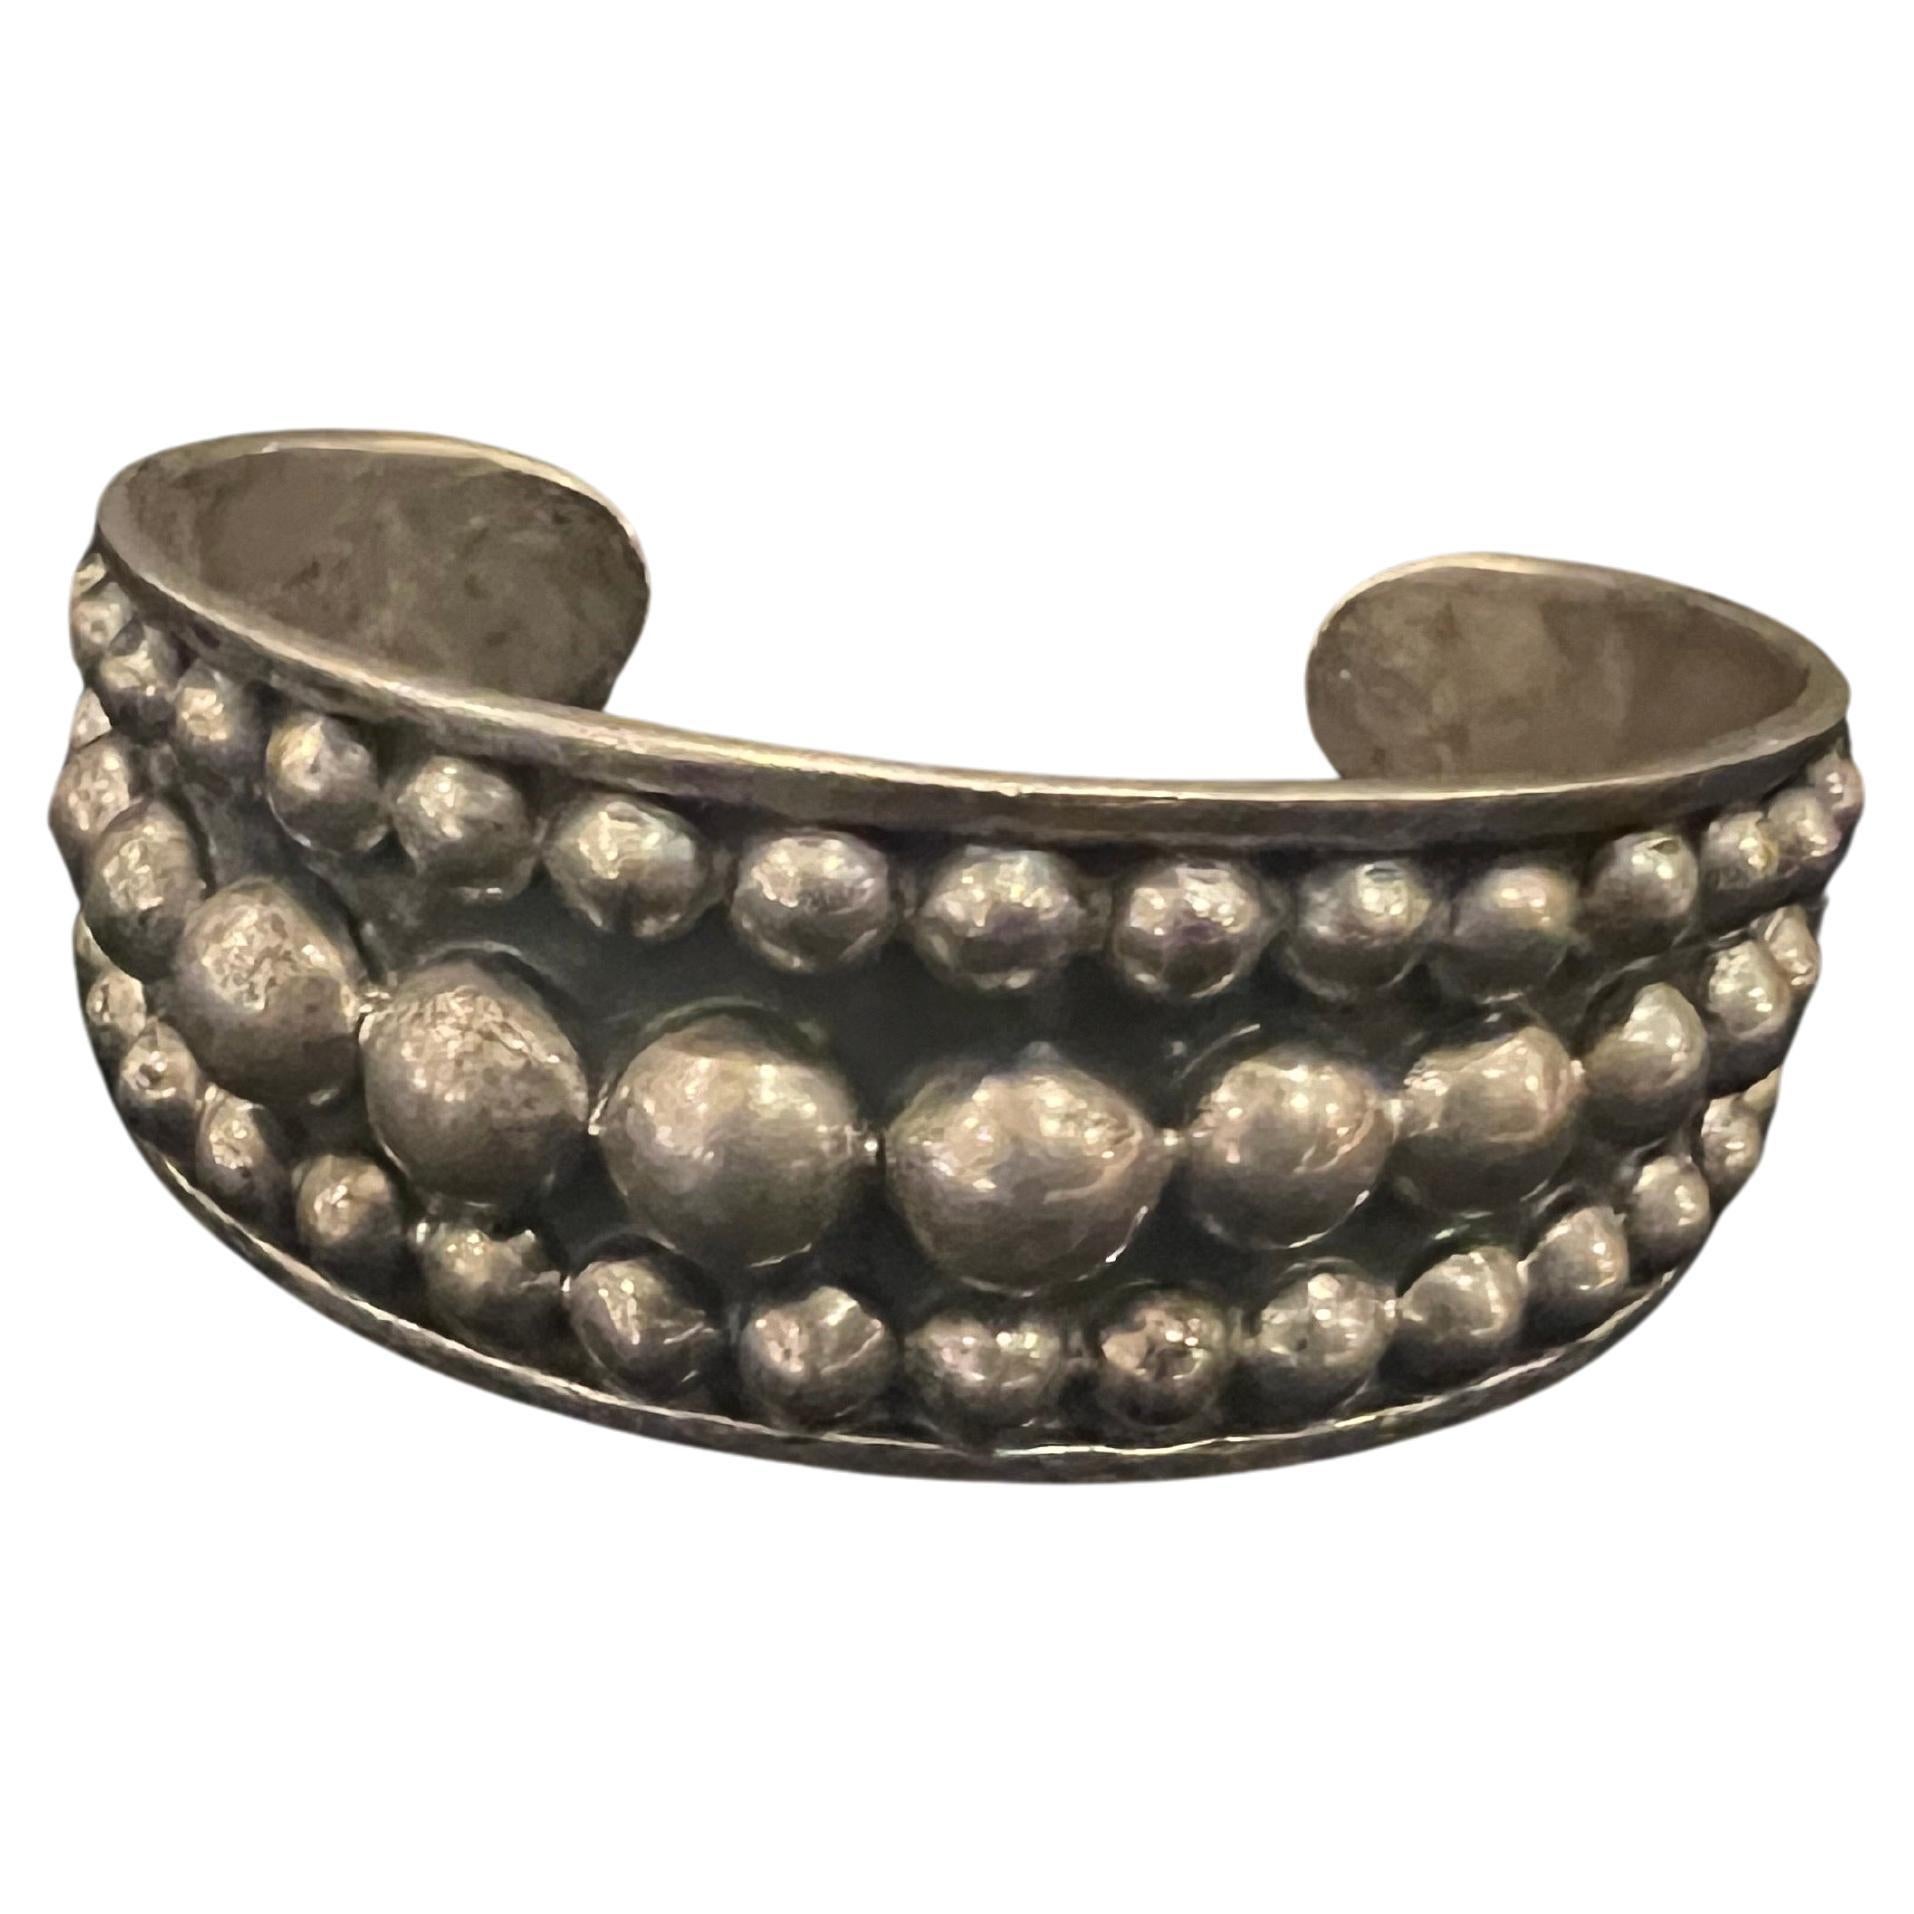 Mexican Abstract Brutalist Modernist Bracelet 925 Sterling Silver Cuff, 1960s For Sale